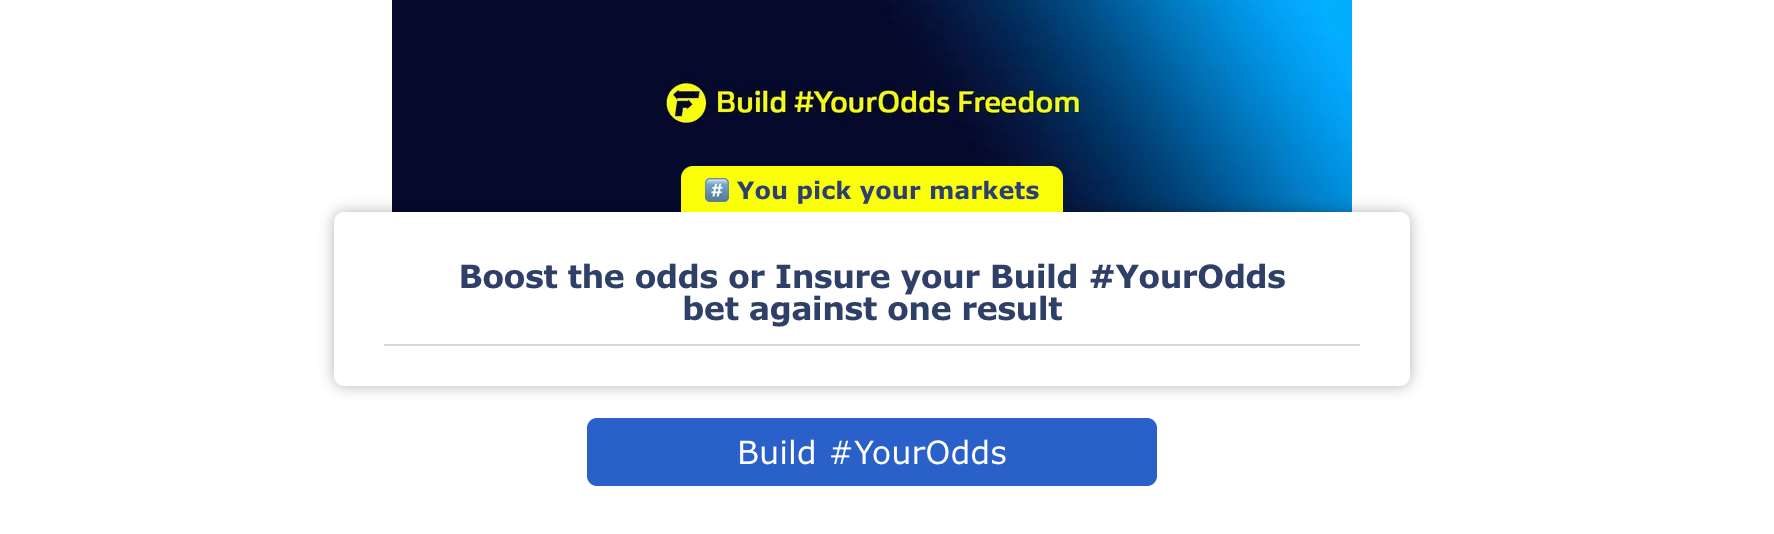 William Hill Build Your Odds Freedom